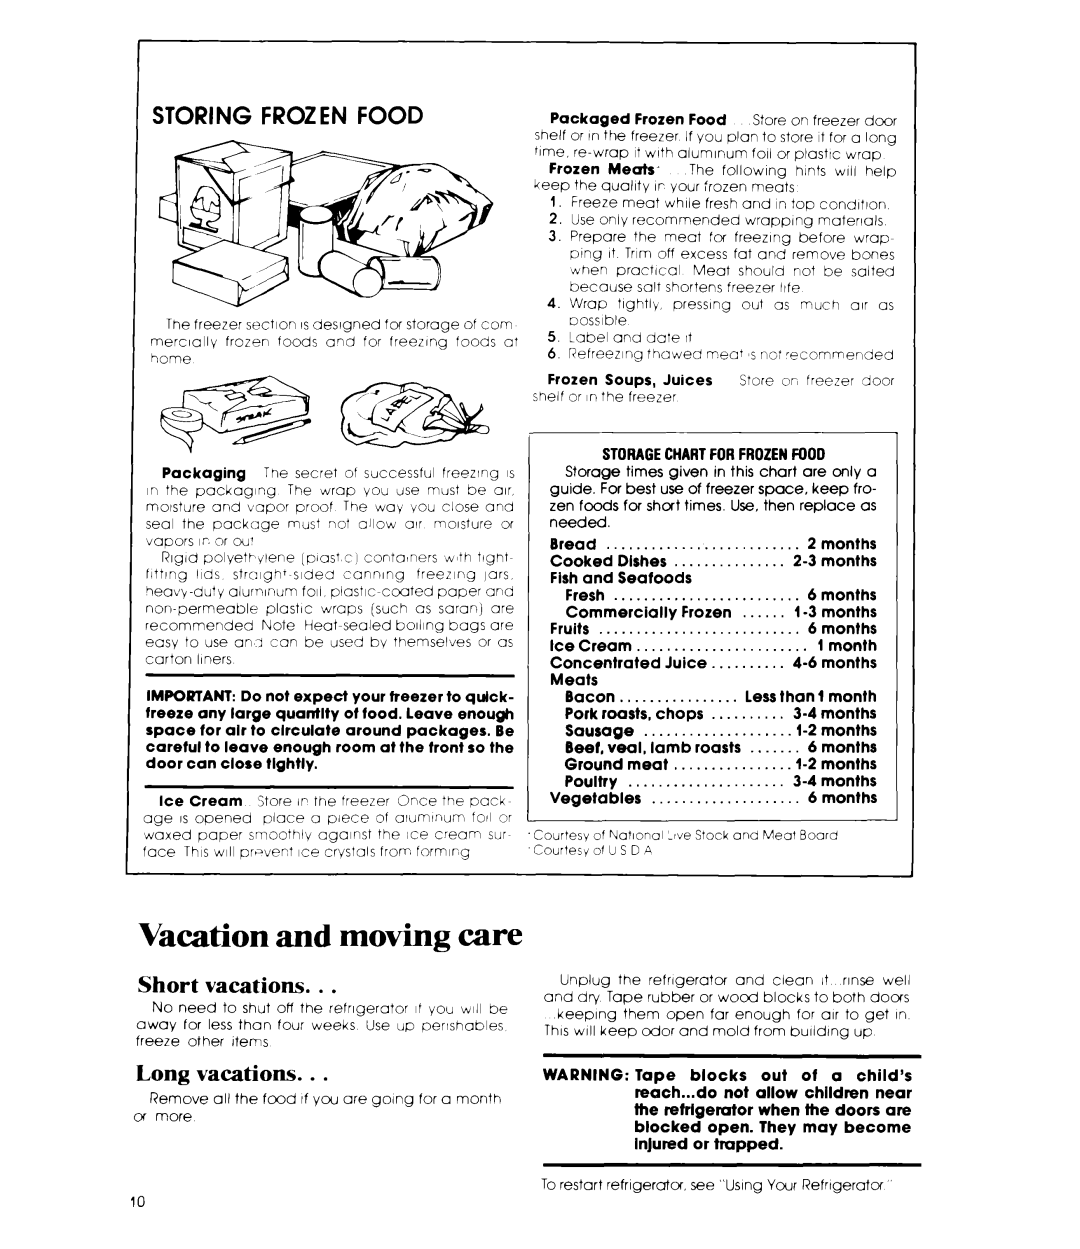 Whirlpool ETl2EC manual Vacation and moving care, Storing Frozen Food, Short vacations, Long vacations 